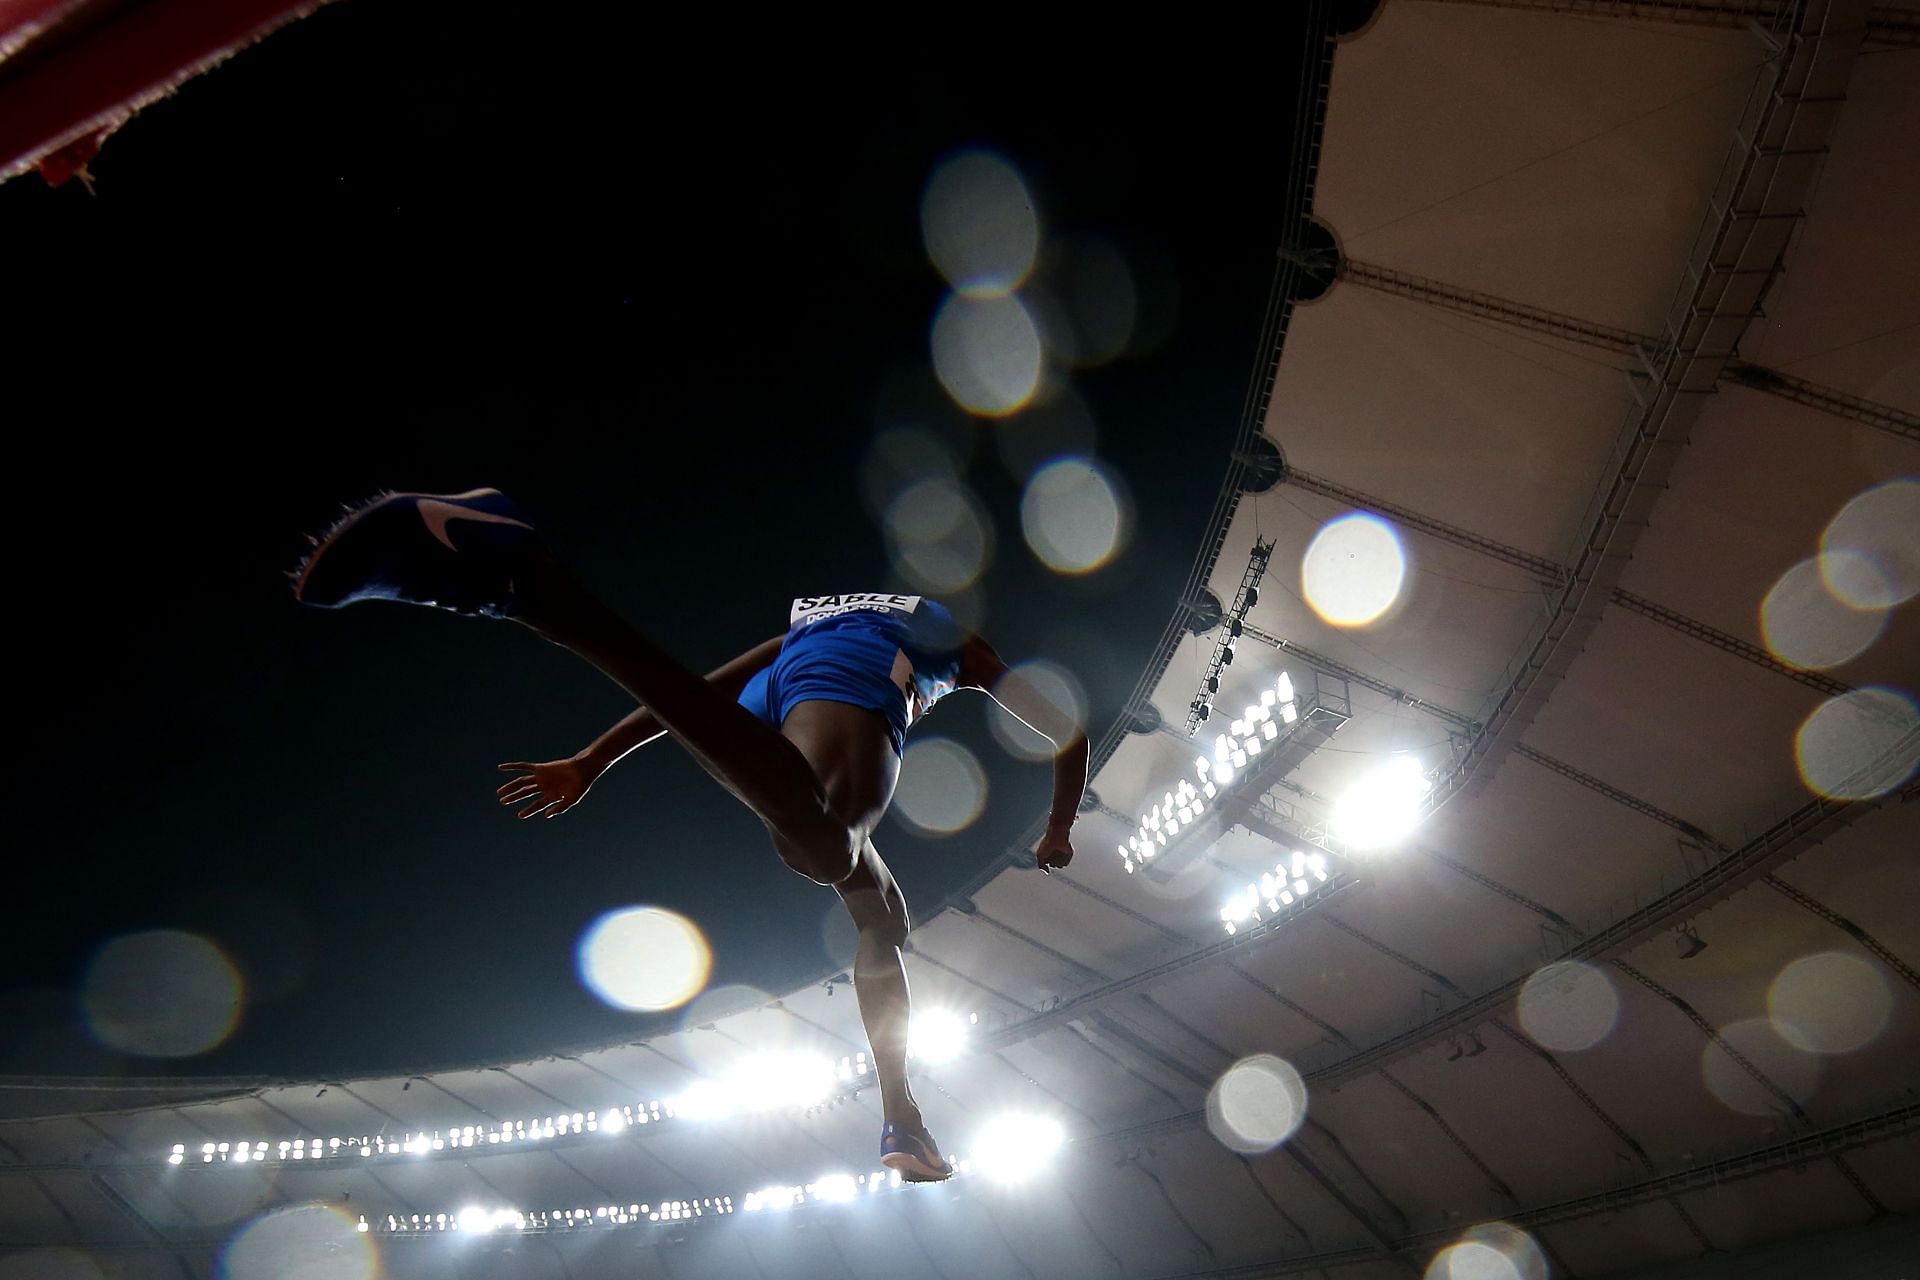 Avinash Sable in action at the 17th IAAF World Athletics Championships Doha 2019 (Image courtesy: Getty Images)